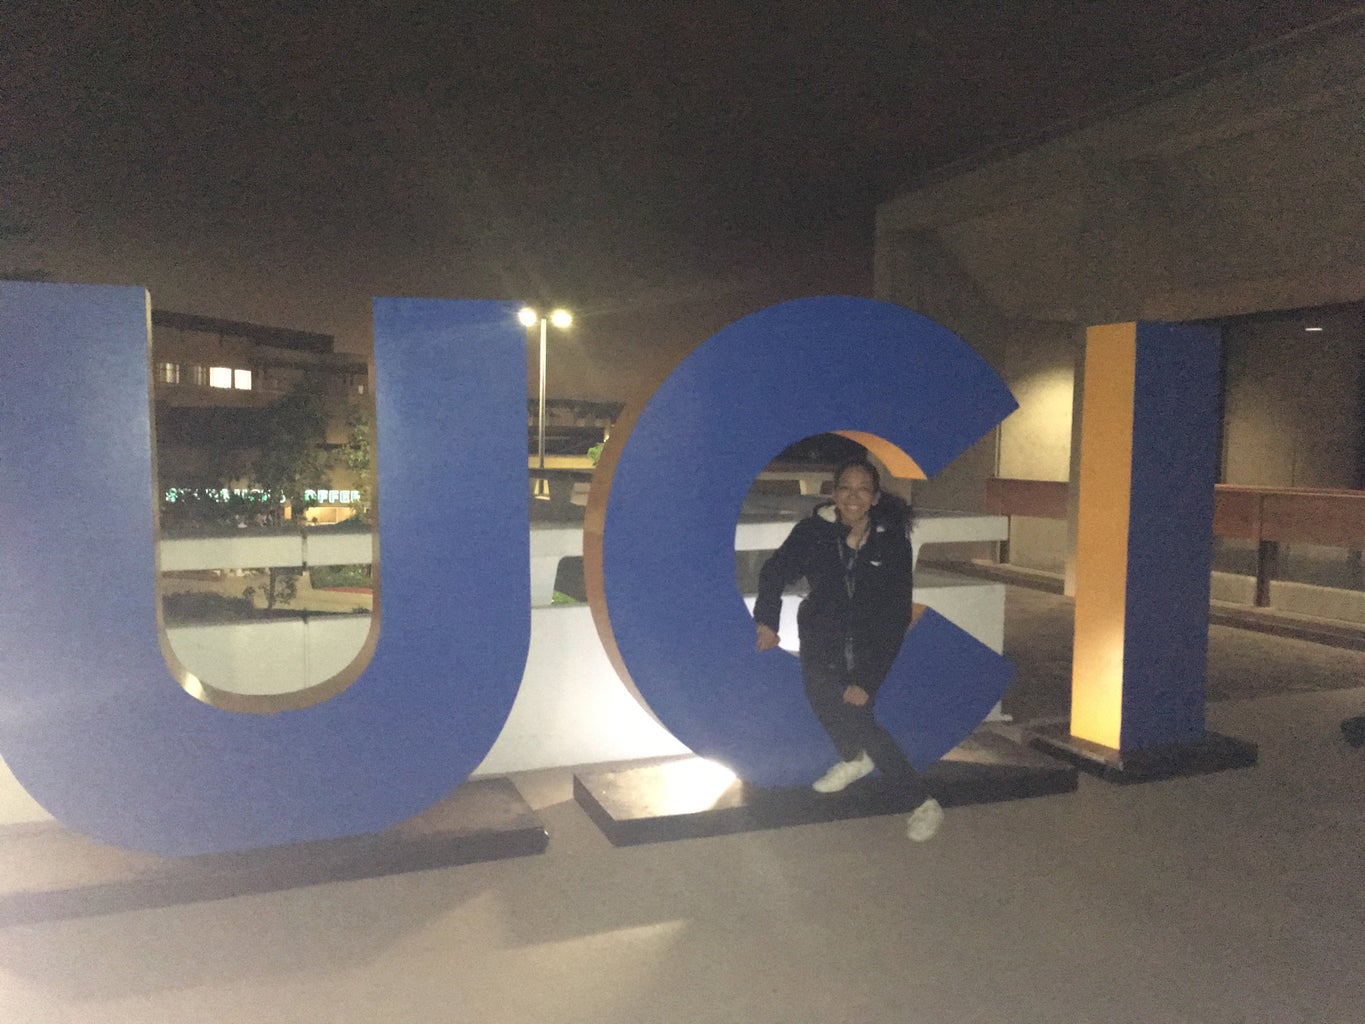 Student at UCI Sign